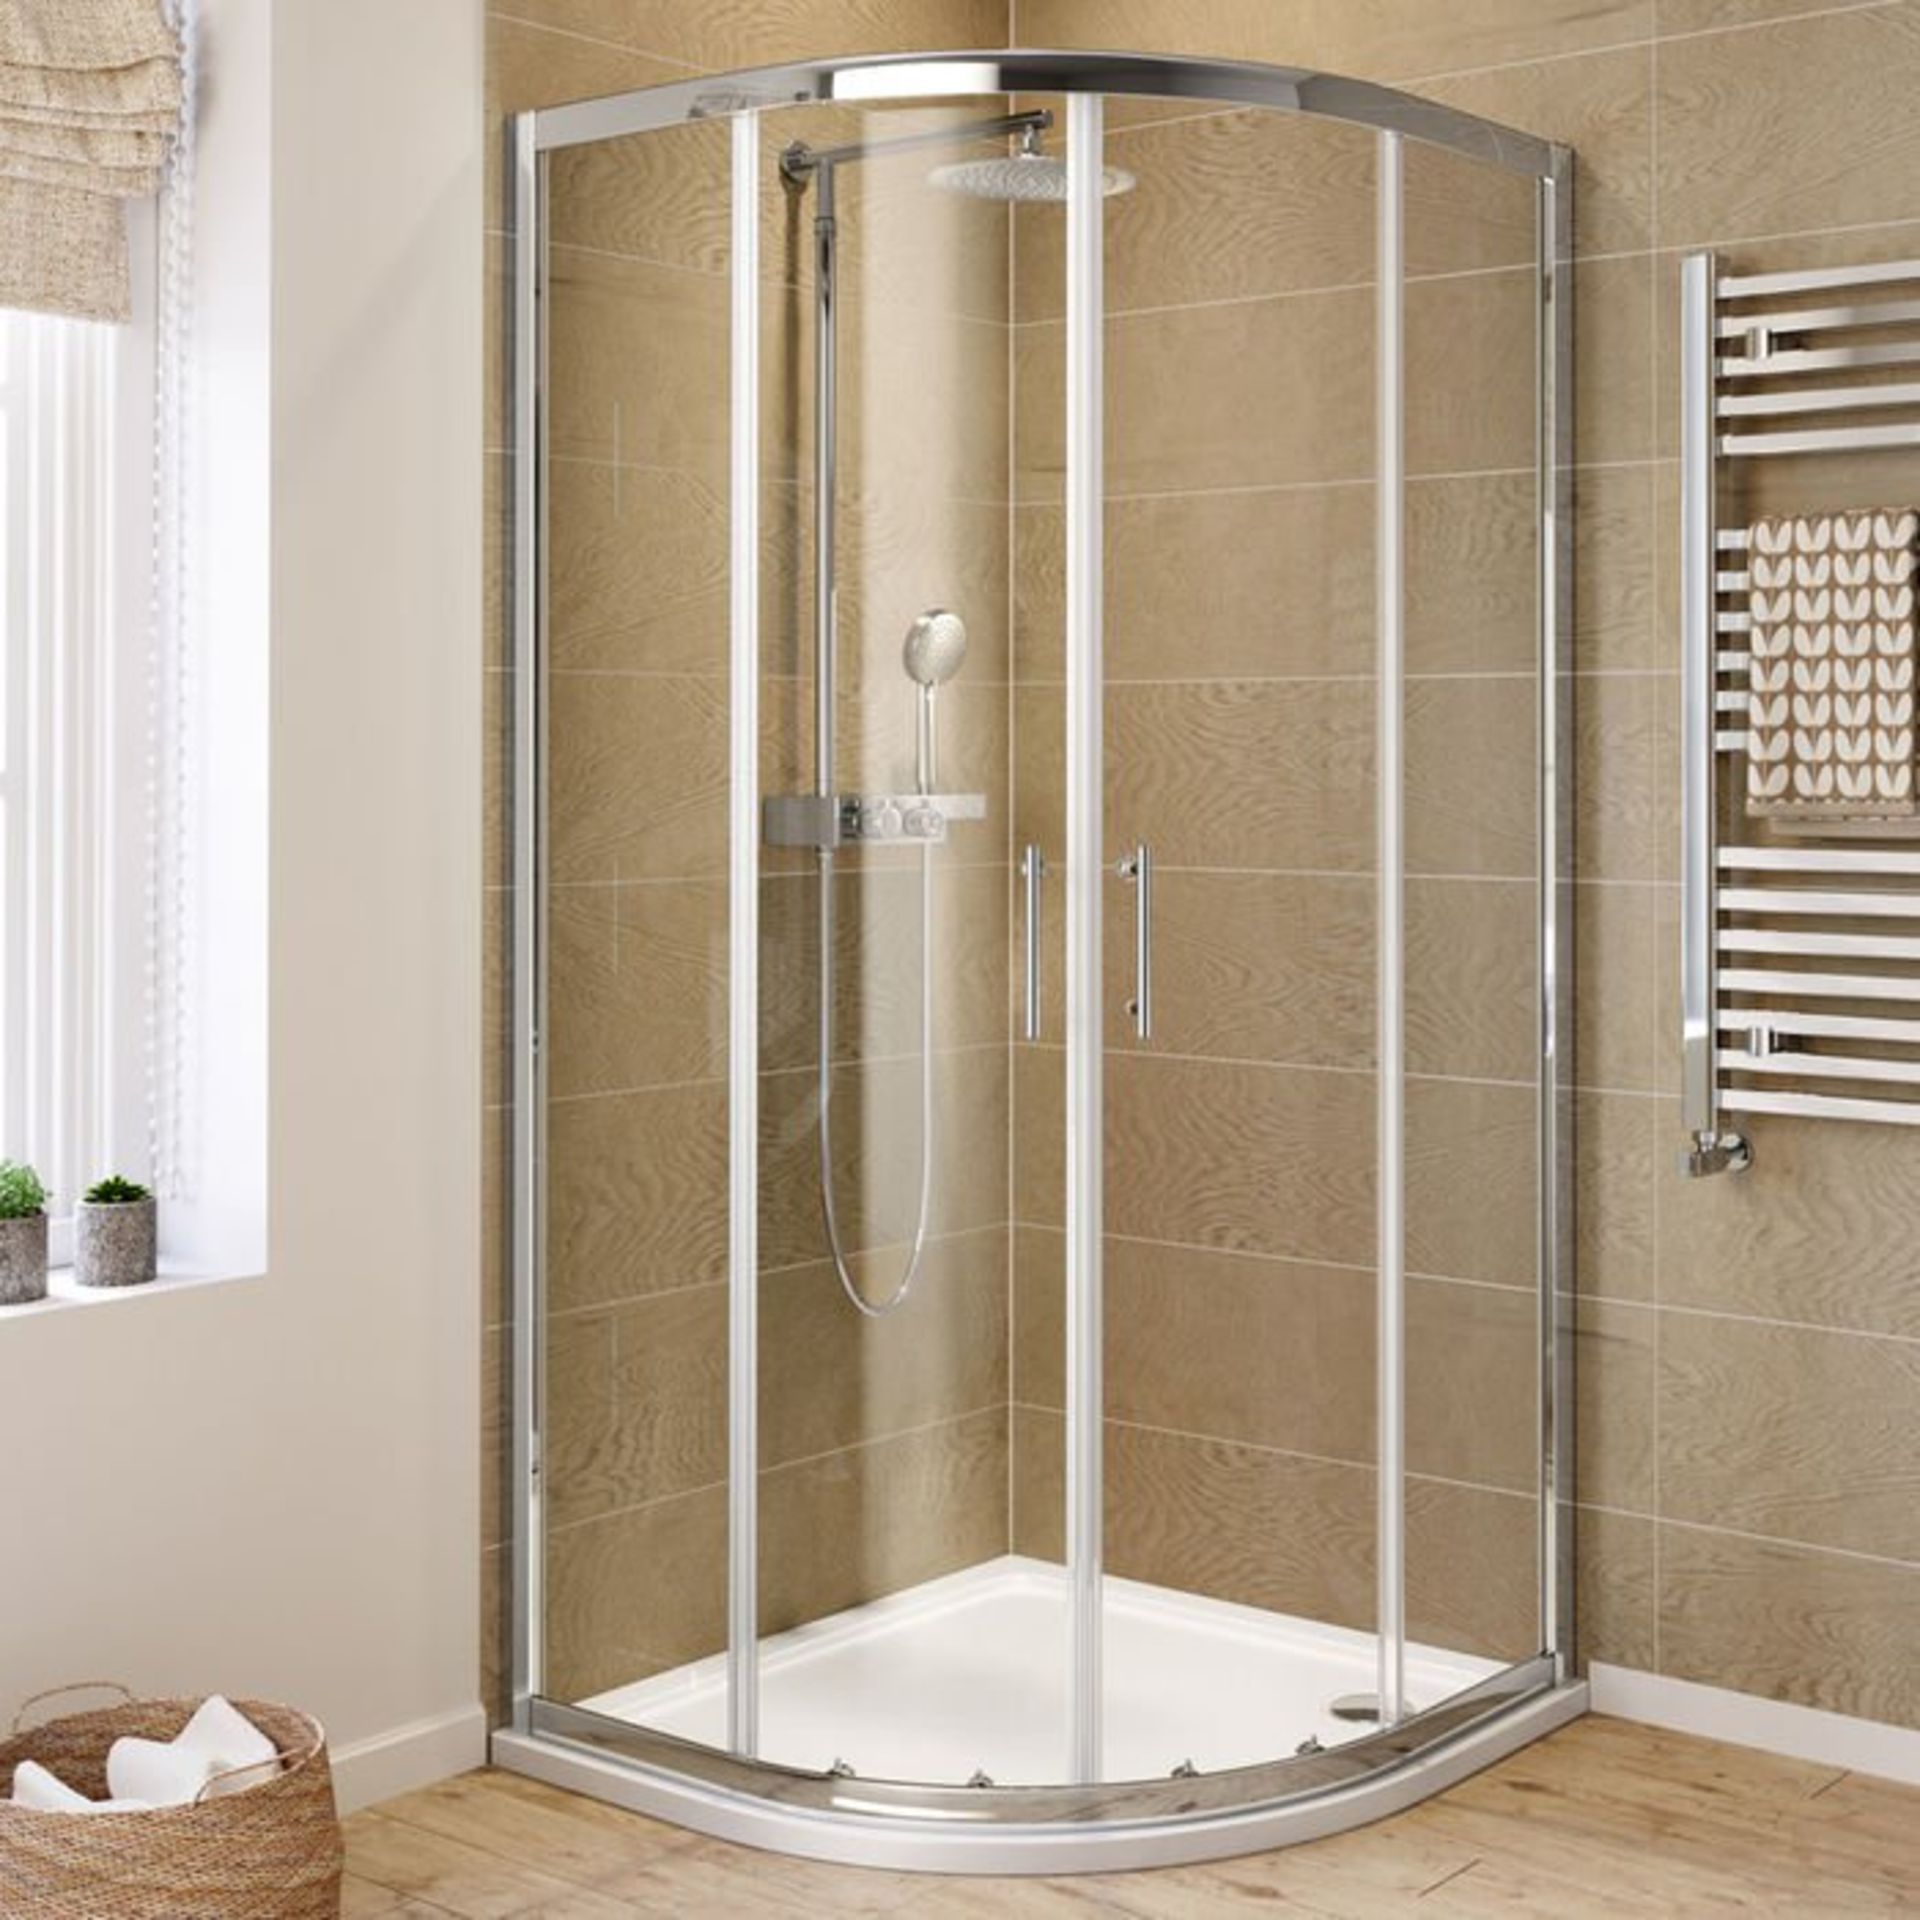 (H53) 800x800mm - 6mm - Elements Quadrant Shower Enclosure RRP £272.99 6mm Safety Glass Fully - Image 2 of 7